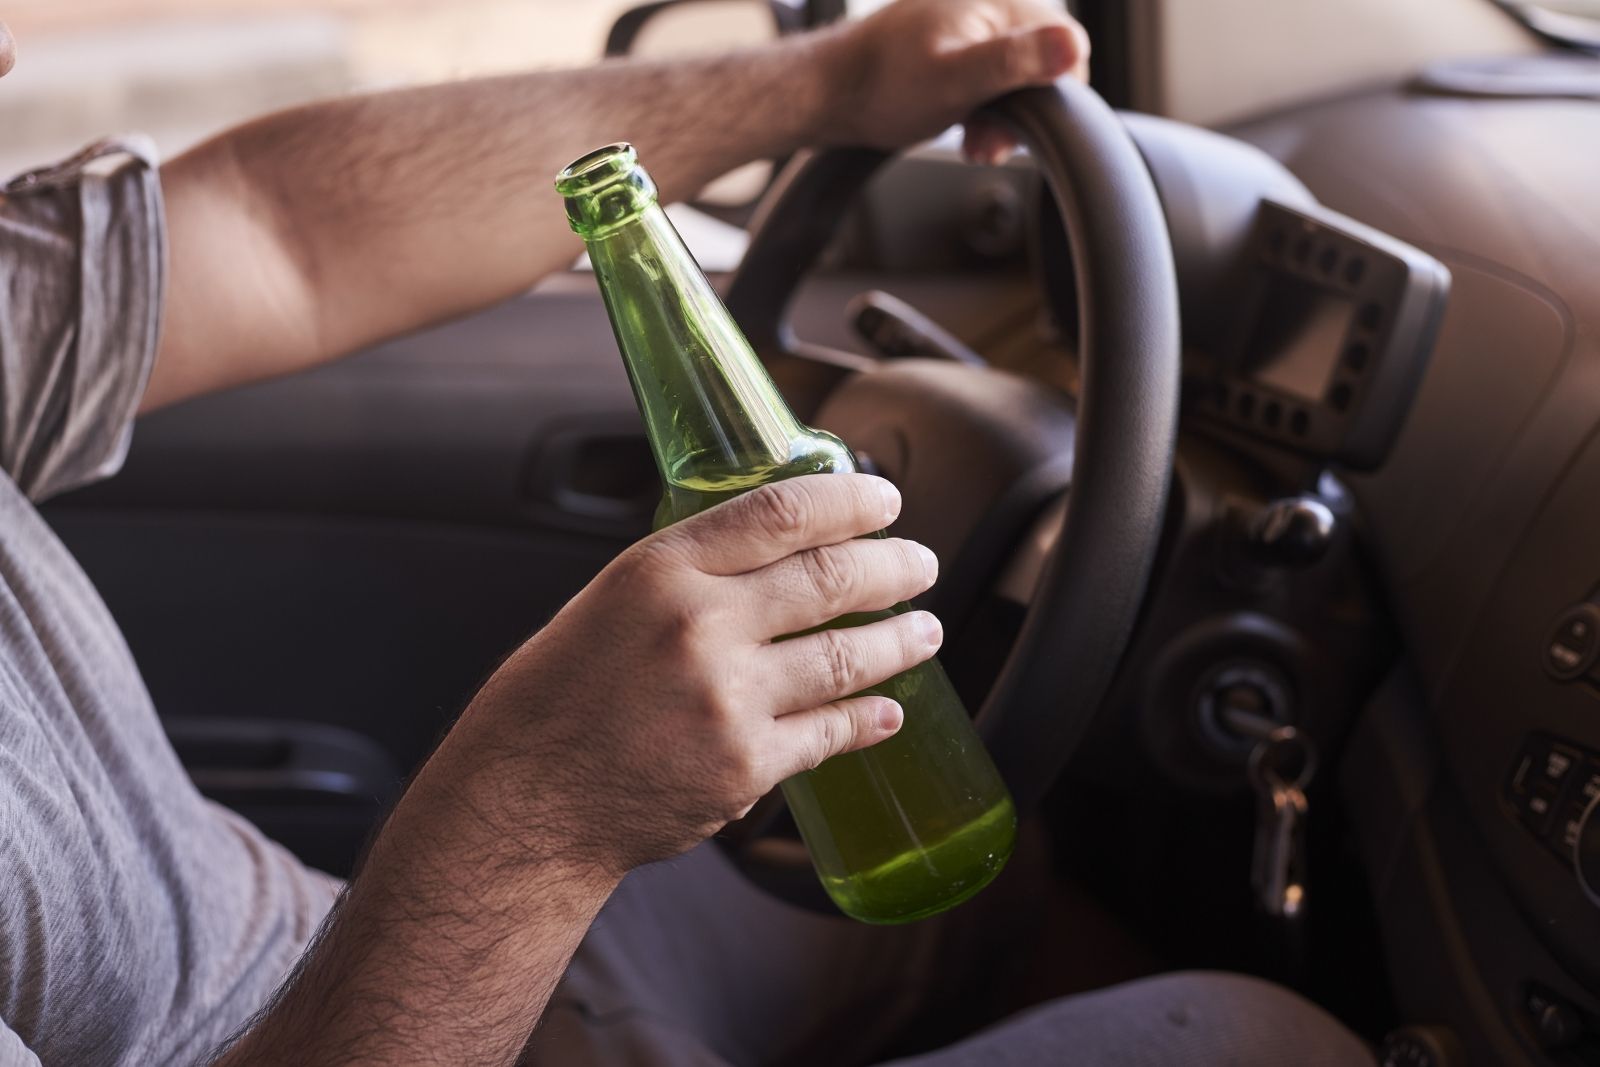 drunk-driving-person-driving-car-drinking-beer_1600x1067.jpg